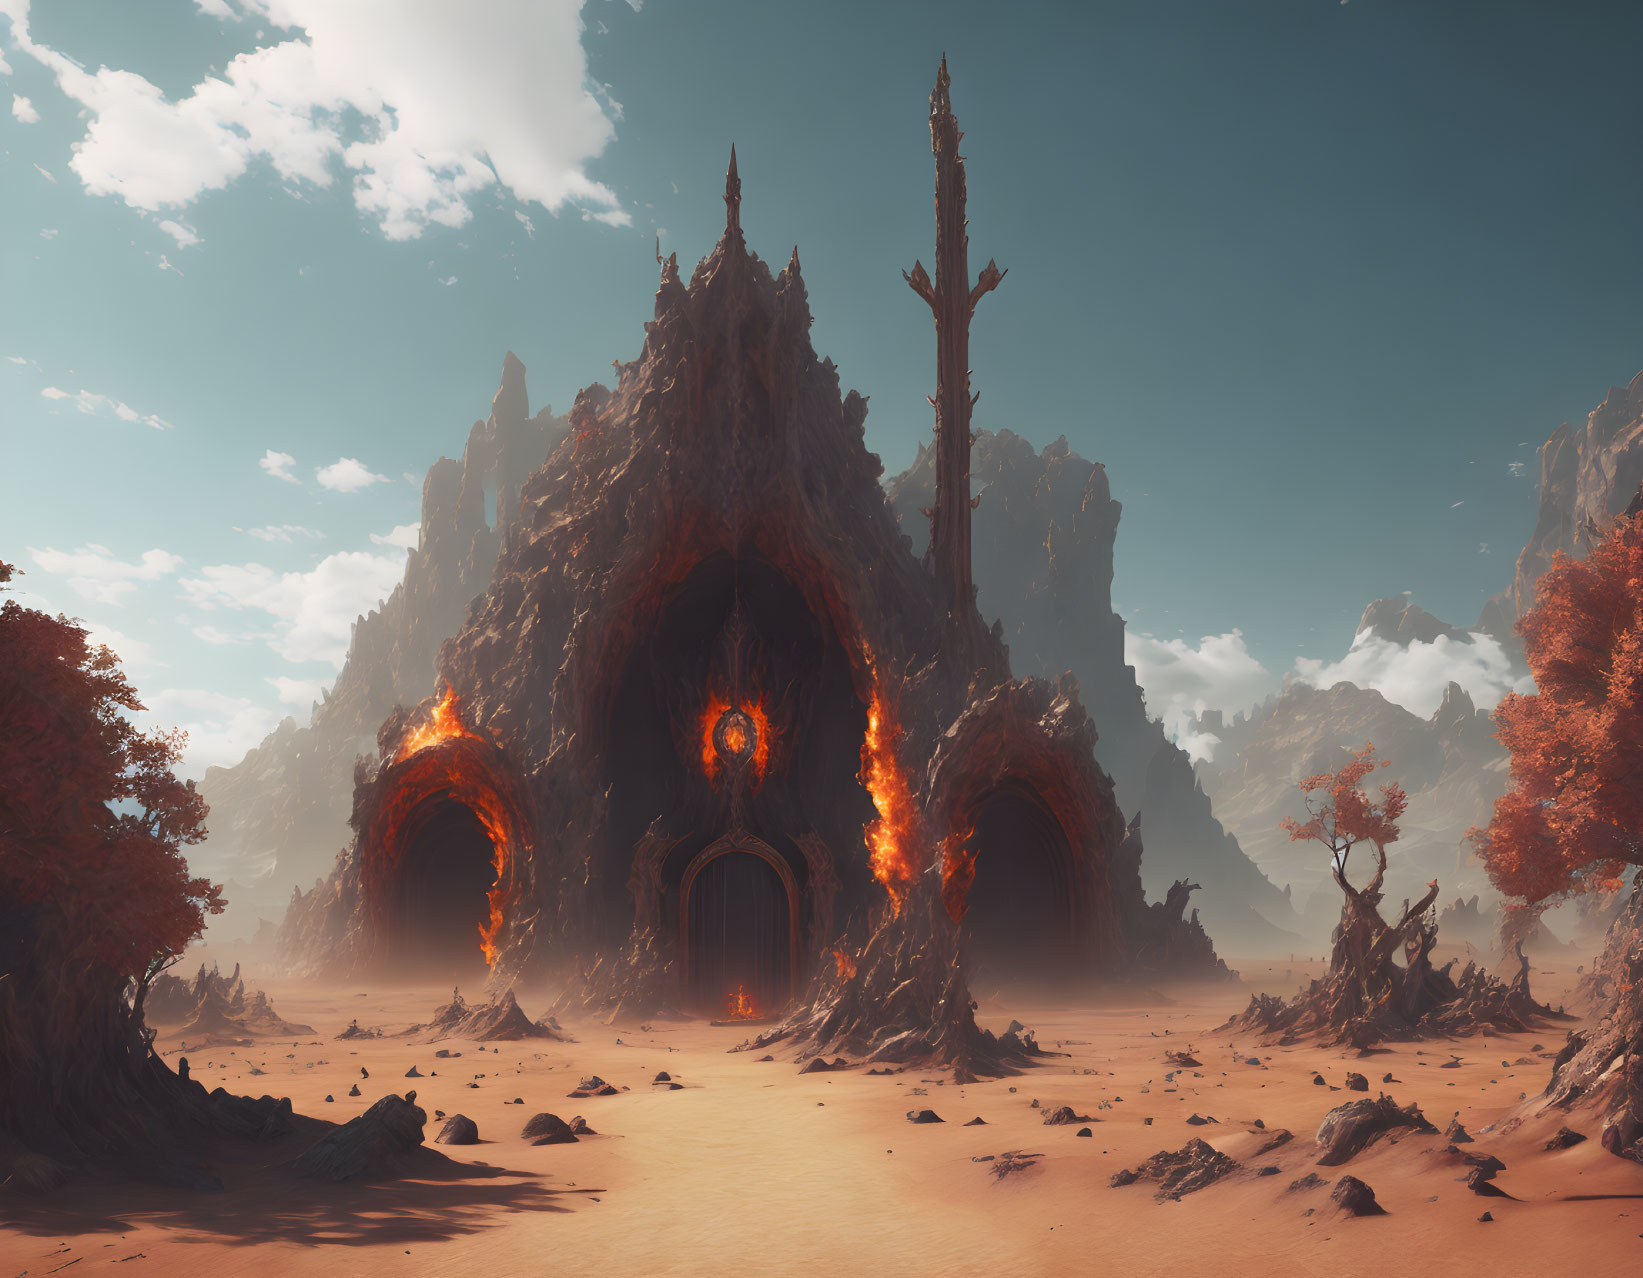 Fantastical landscape with glowing portals and rocky structure